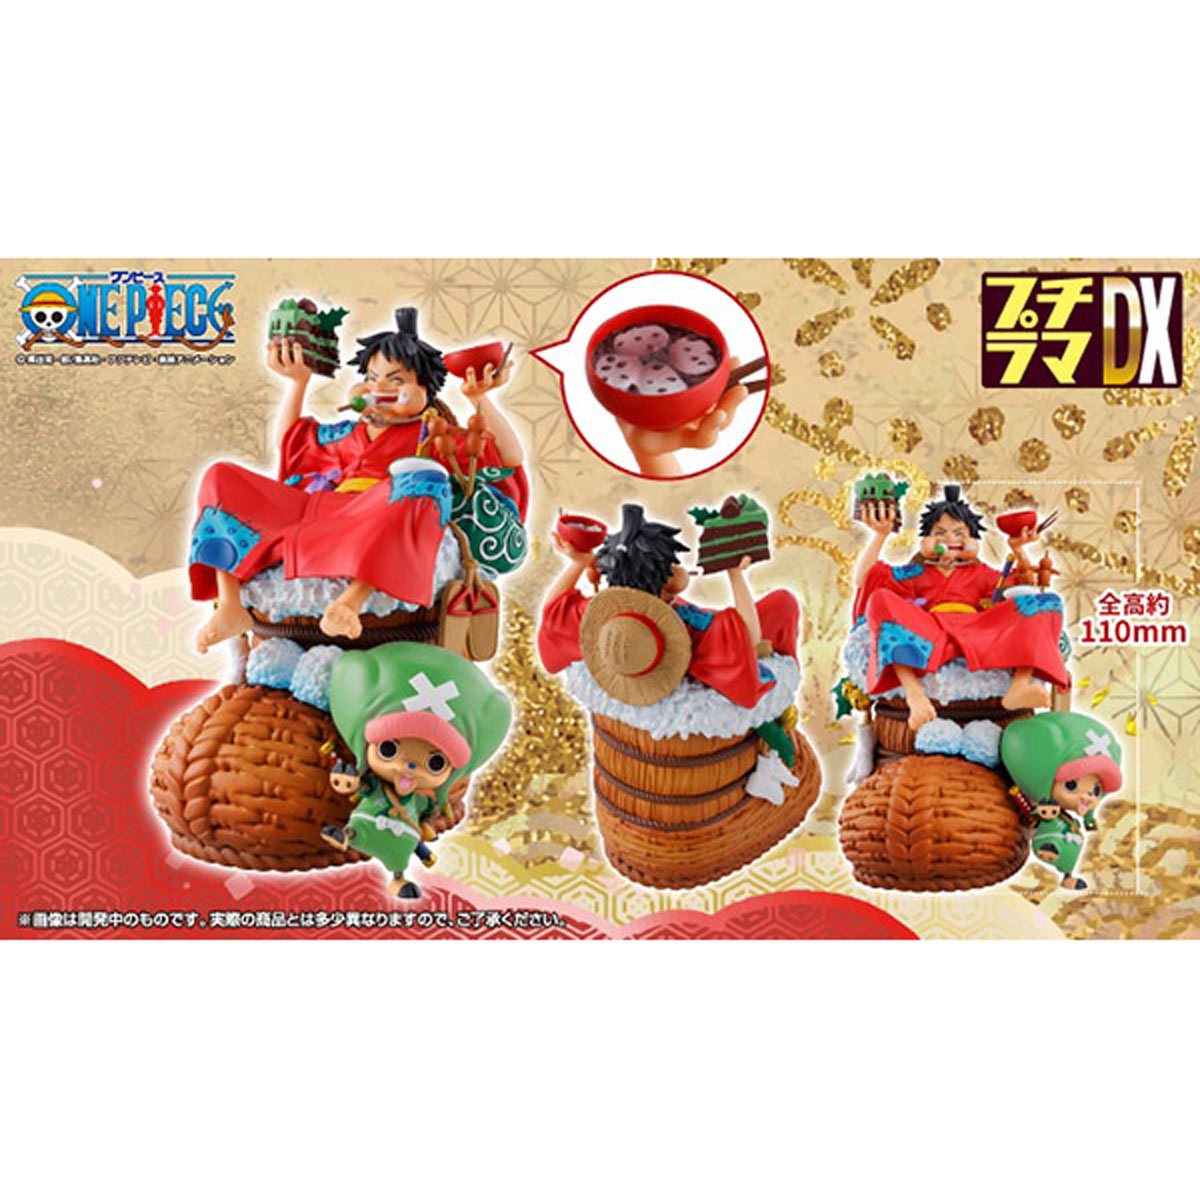 Petitrama DX Monkey D. Luffy Figure One Piece Collectible By Megahouse